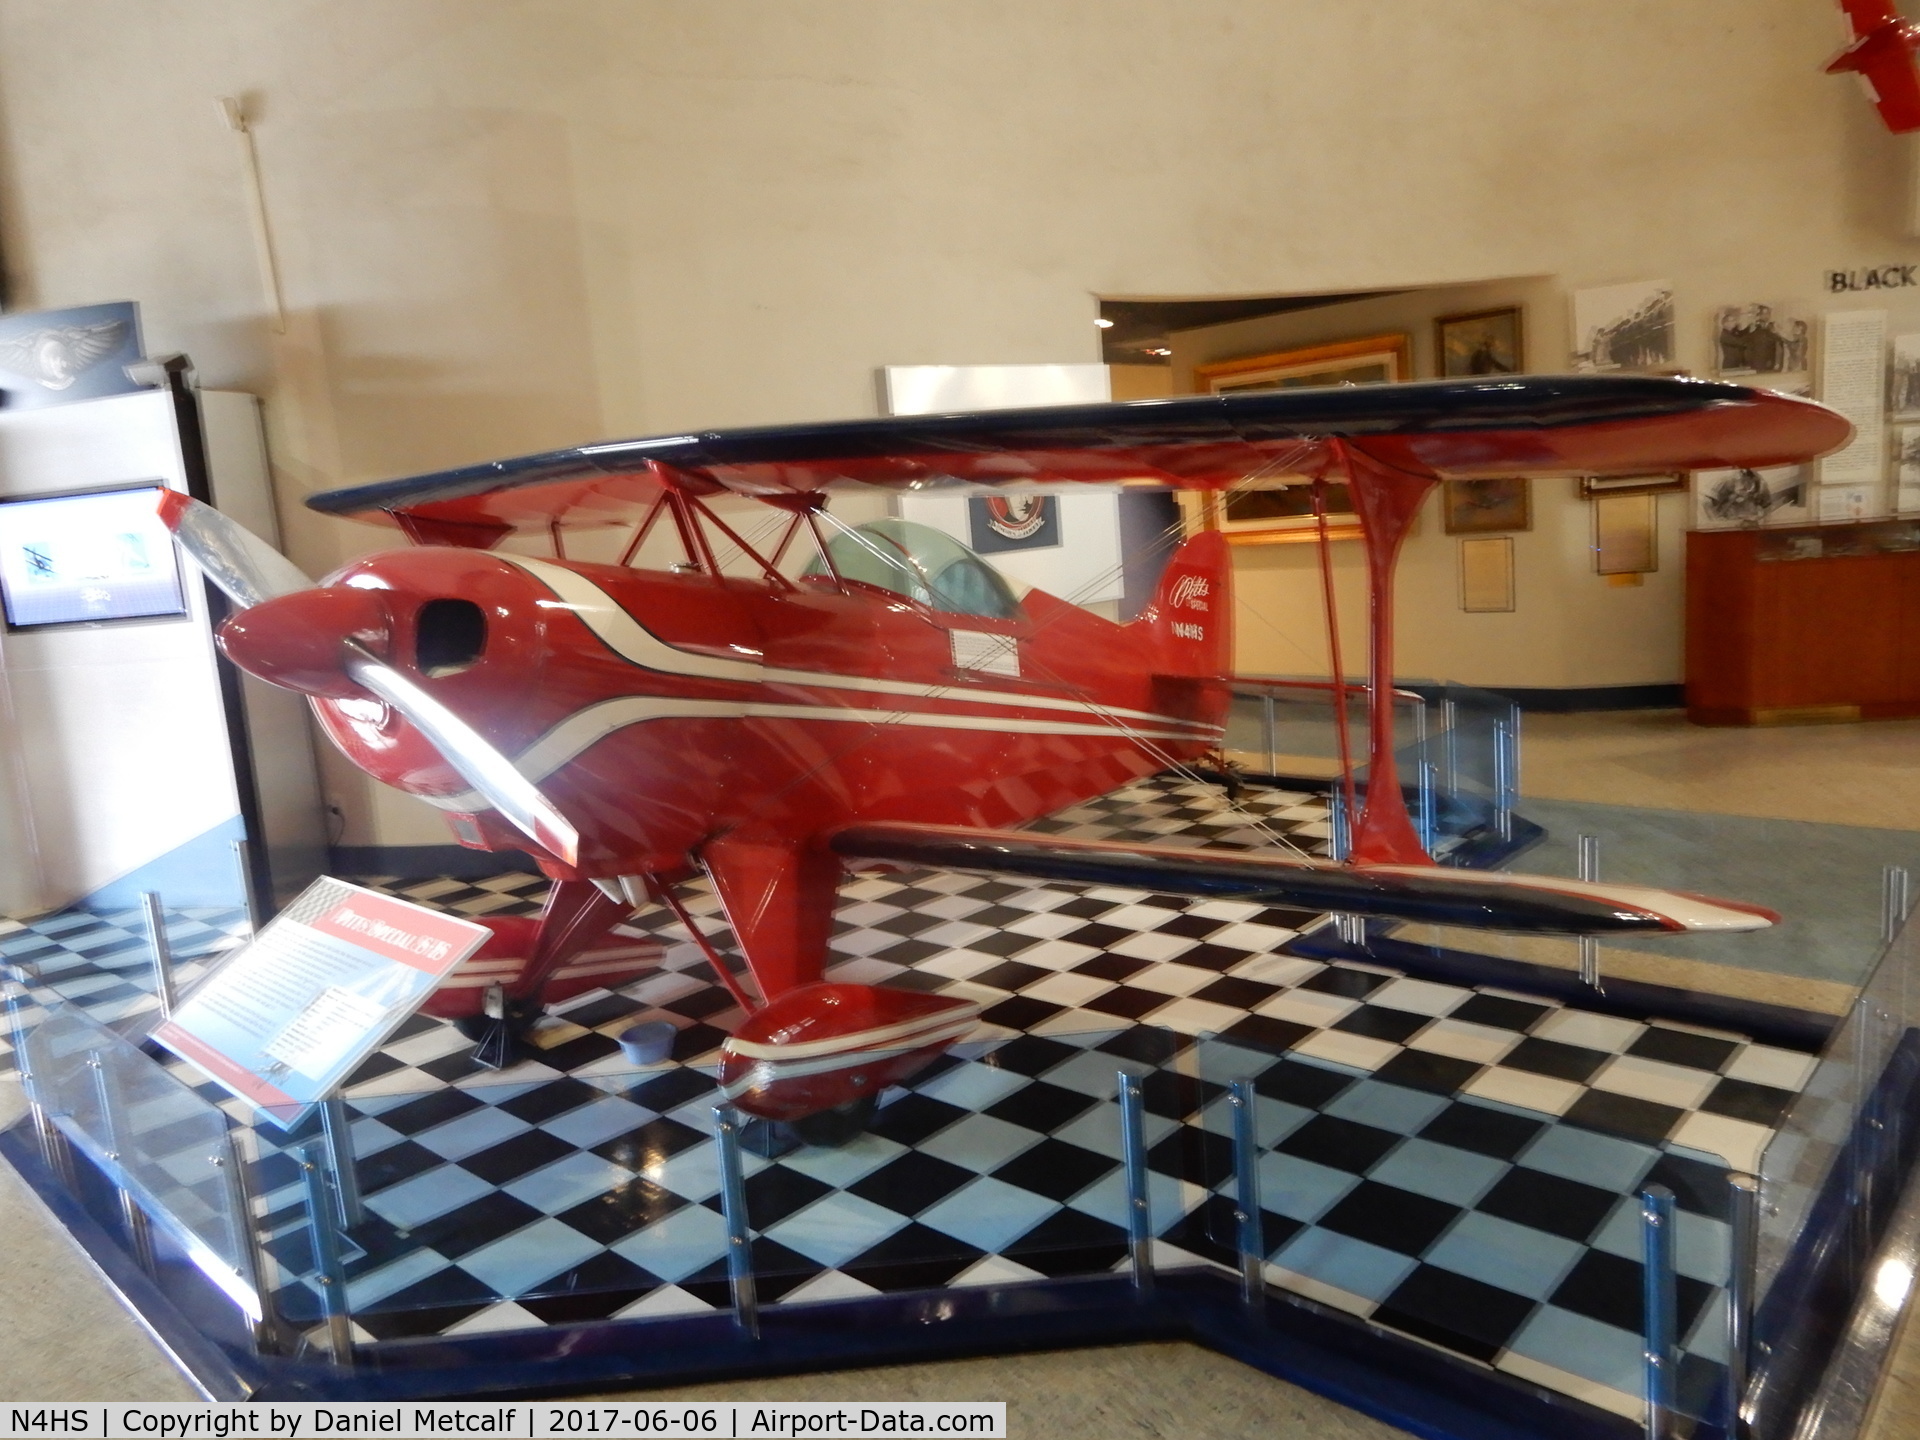 N4HS, 1975 Pitts S-1S Special C/N 10034, San Diego Air & Space Museum (Balboa Park, San Diego, CA Location)